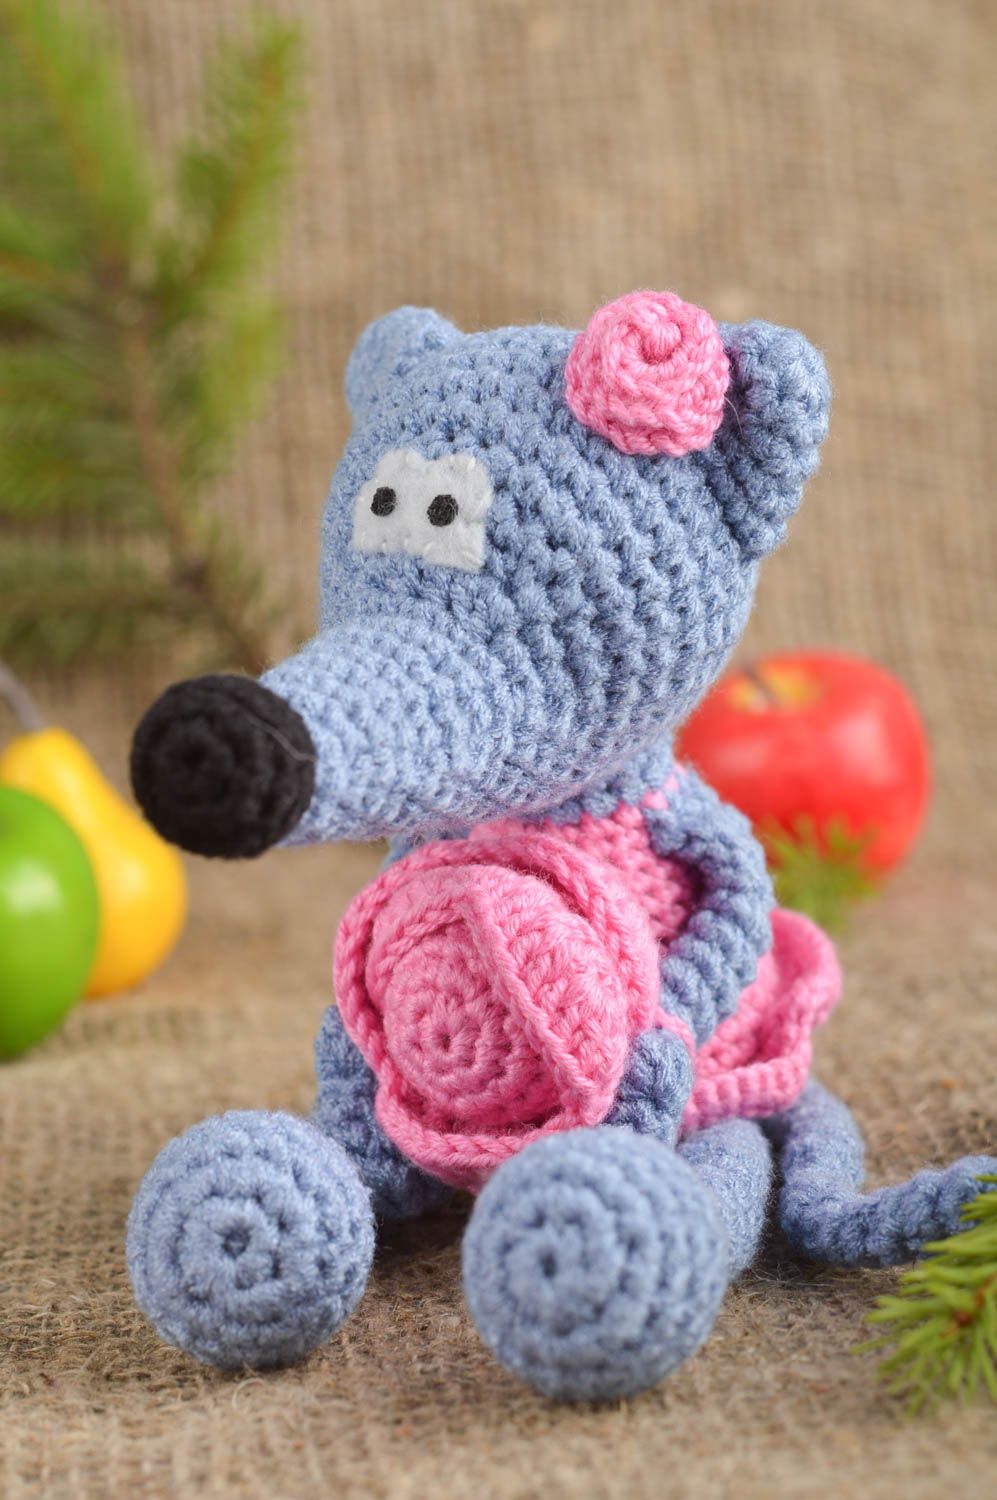 Handmade crocheted toy baby soft toycrocheted mouse toy design crocheted toys   photo 1